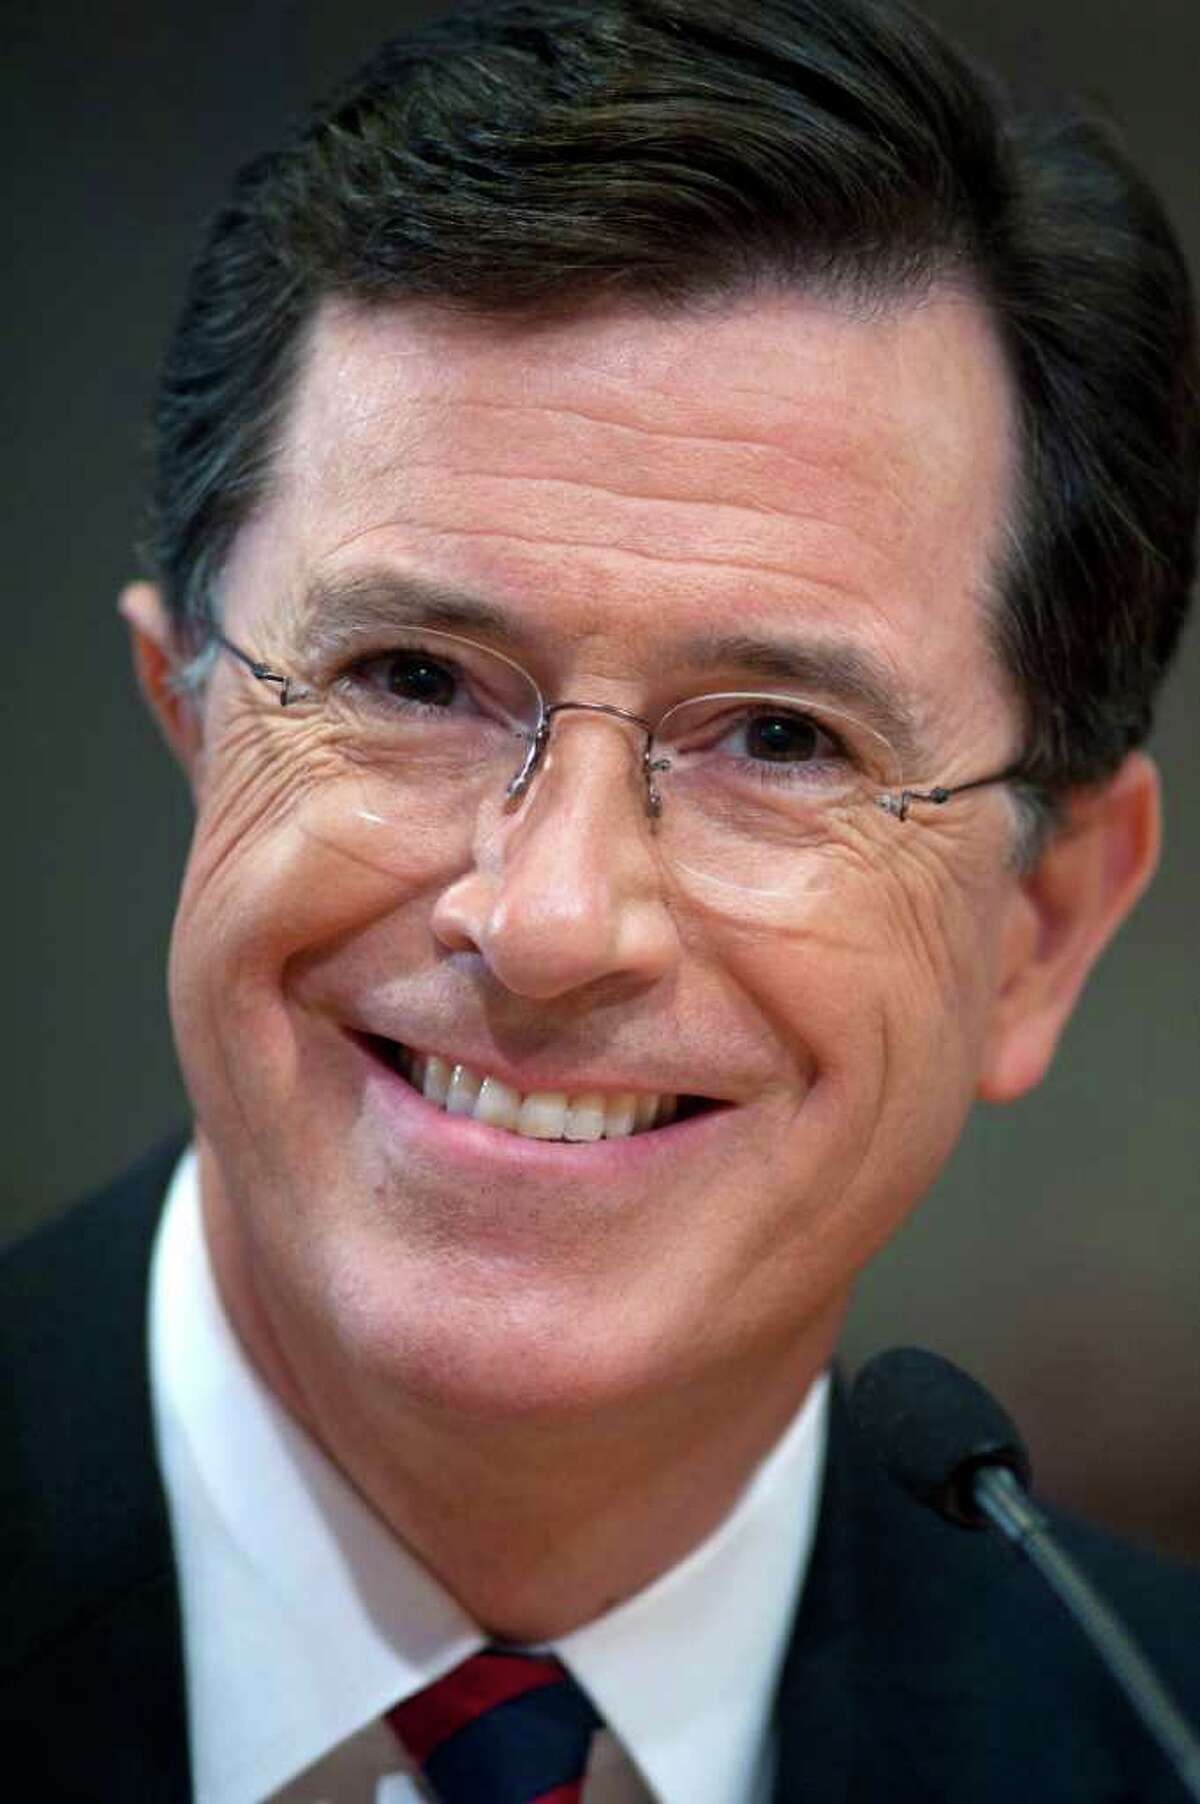 FILE- This Thursday, June 30, 2011 file photo shows comedian Stephen Colbert as he appears before the Federal Election Commission in Washington. Colbert says he will pay half a million dollars to help fund South Carolina's first-in-the-South GOP presidential primary. The Palmetto State native wrote in an op-ed Thursday in The State newspaper in Columbia that his super PAC will bridge the gap after state Republicans refused to contribute anything above candidates' filing fees. (AP Photo/Cliff Owen, File)